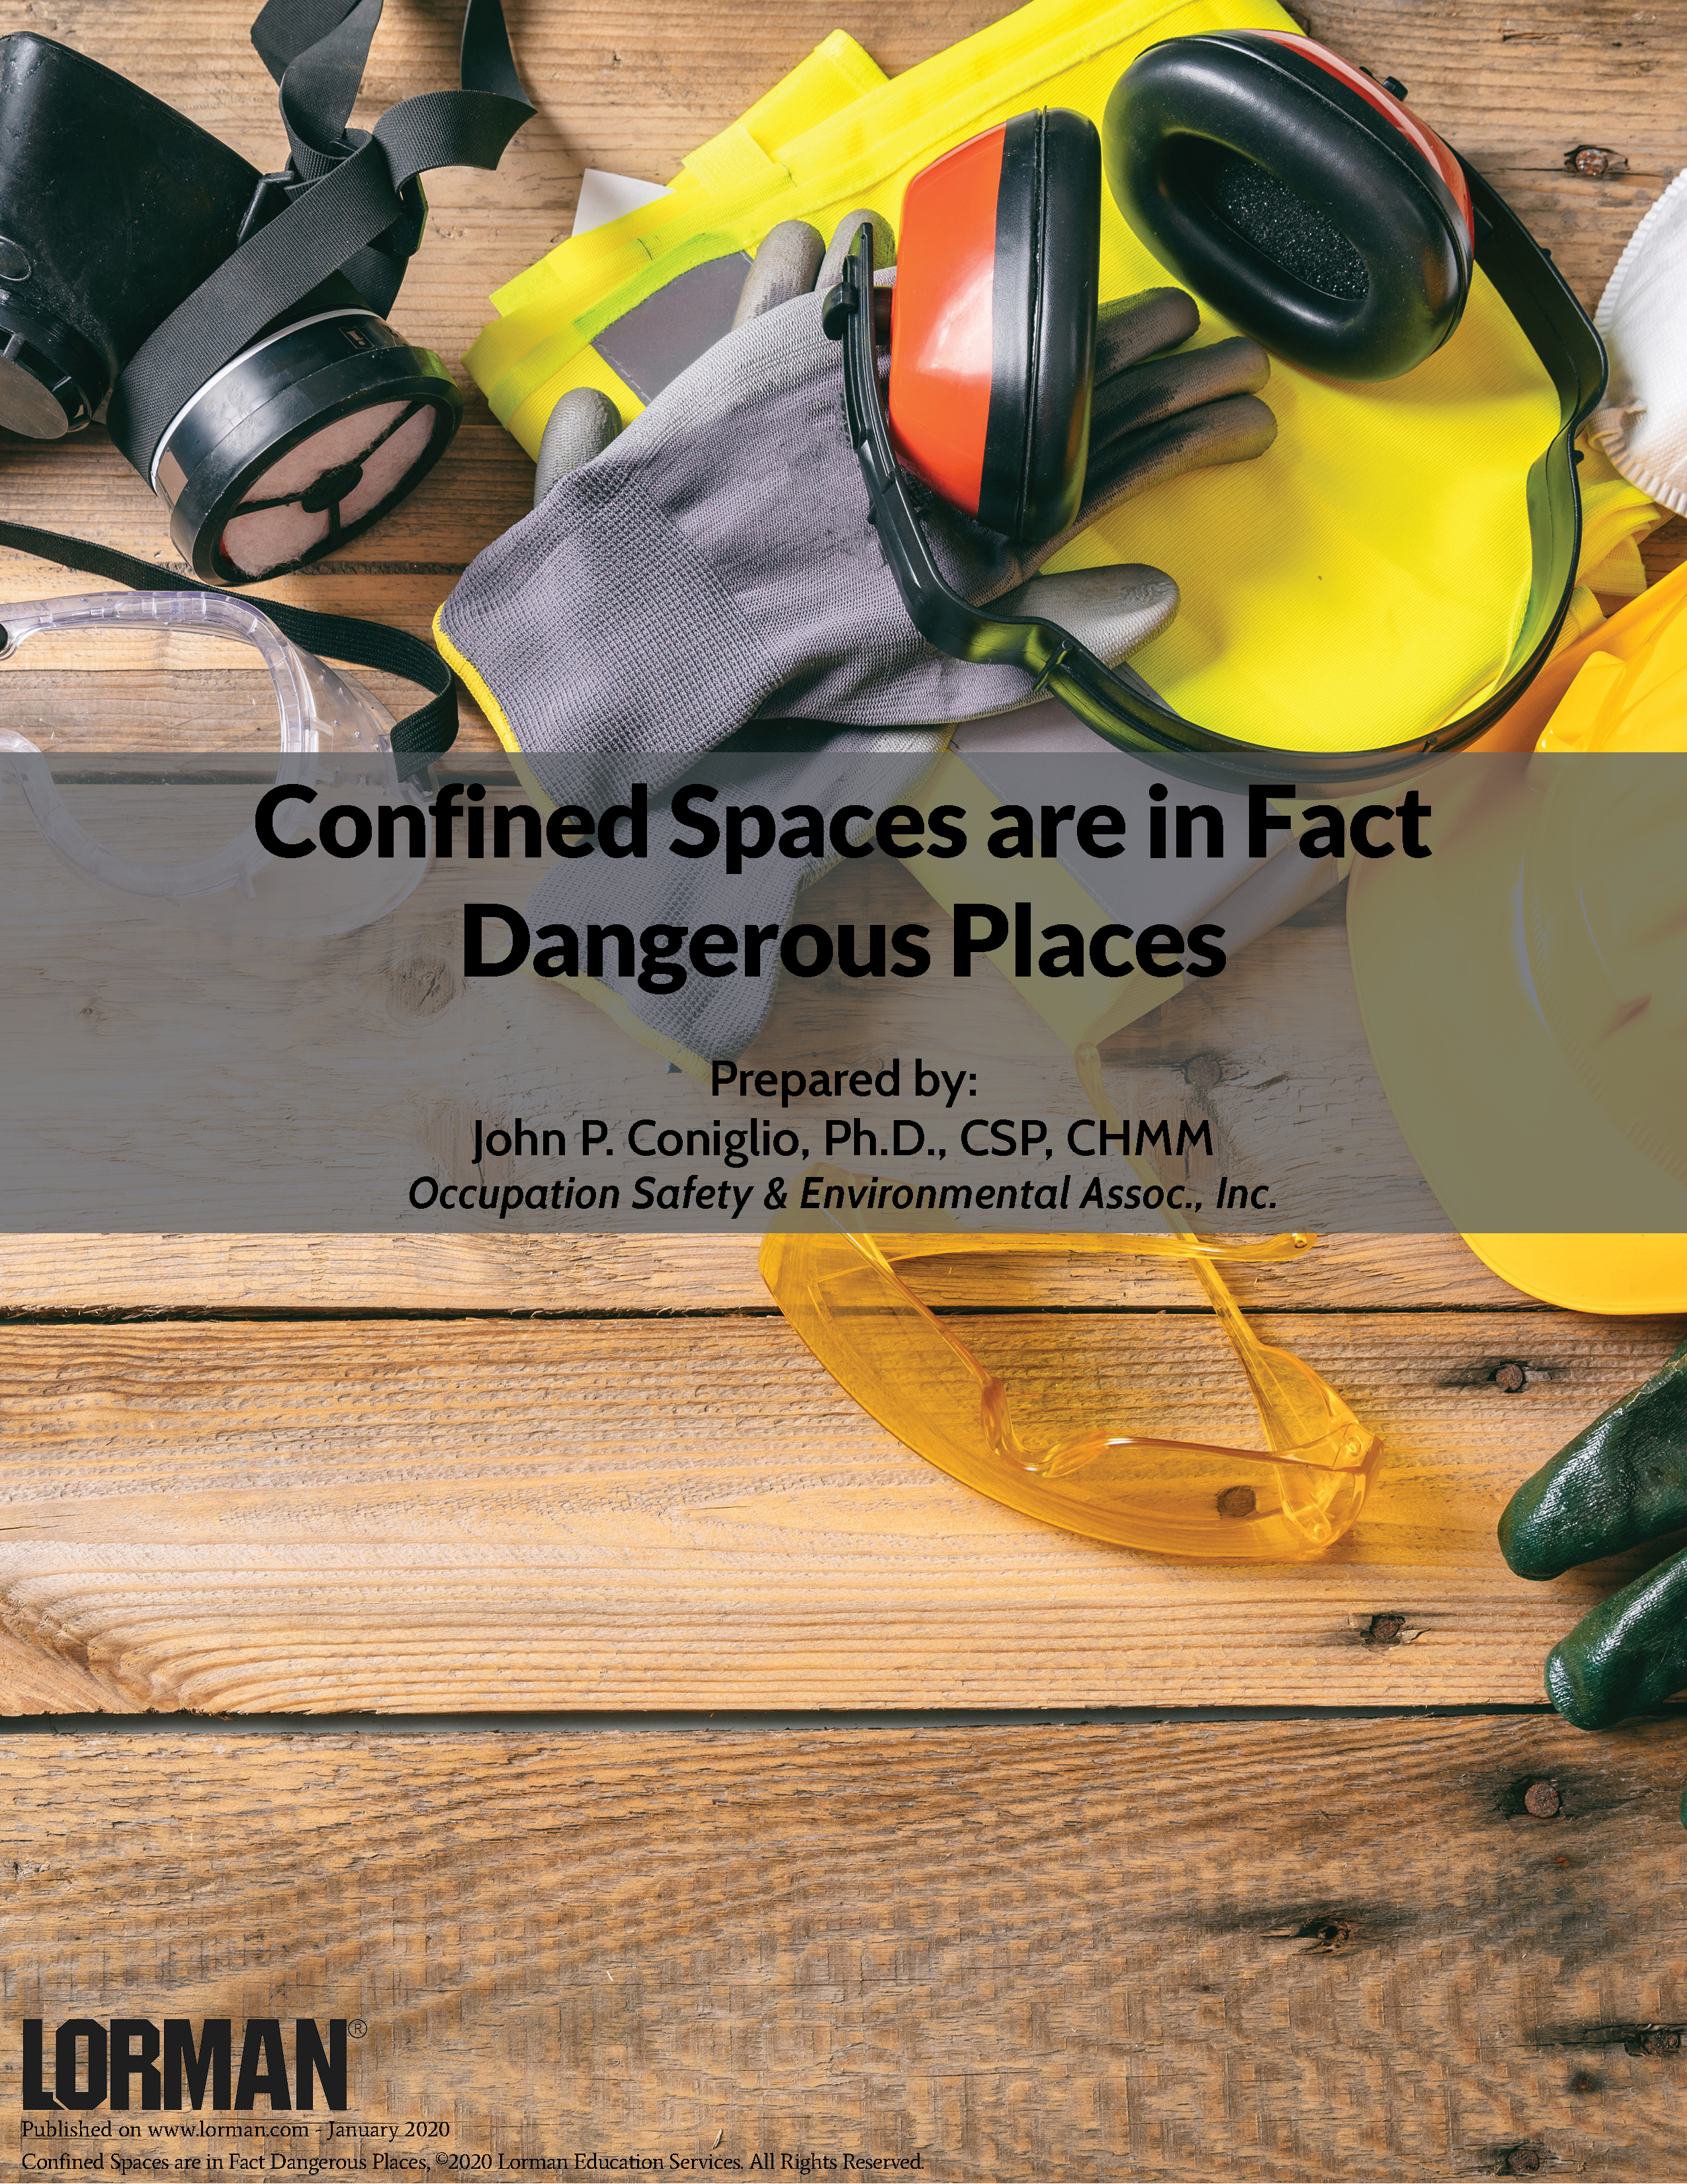 Confined Spaces are in Fact Dangerous Places